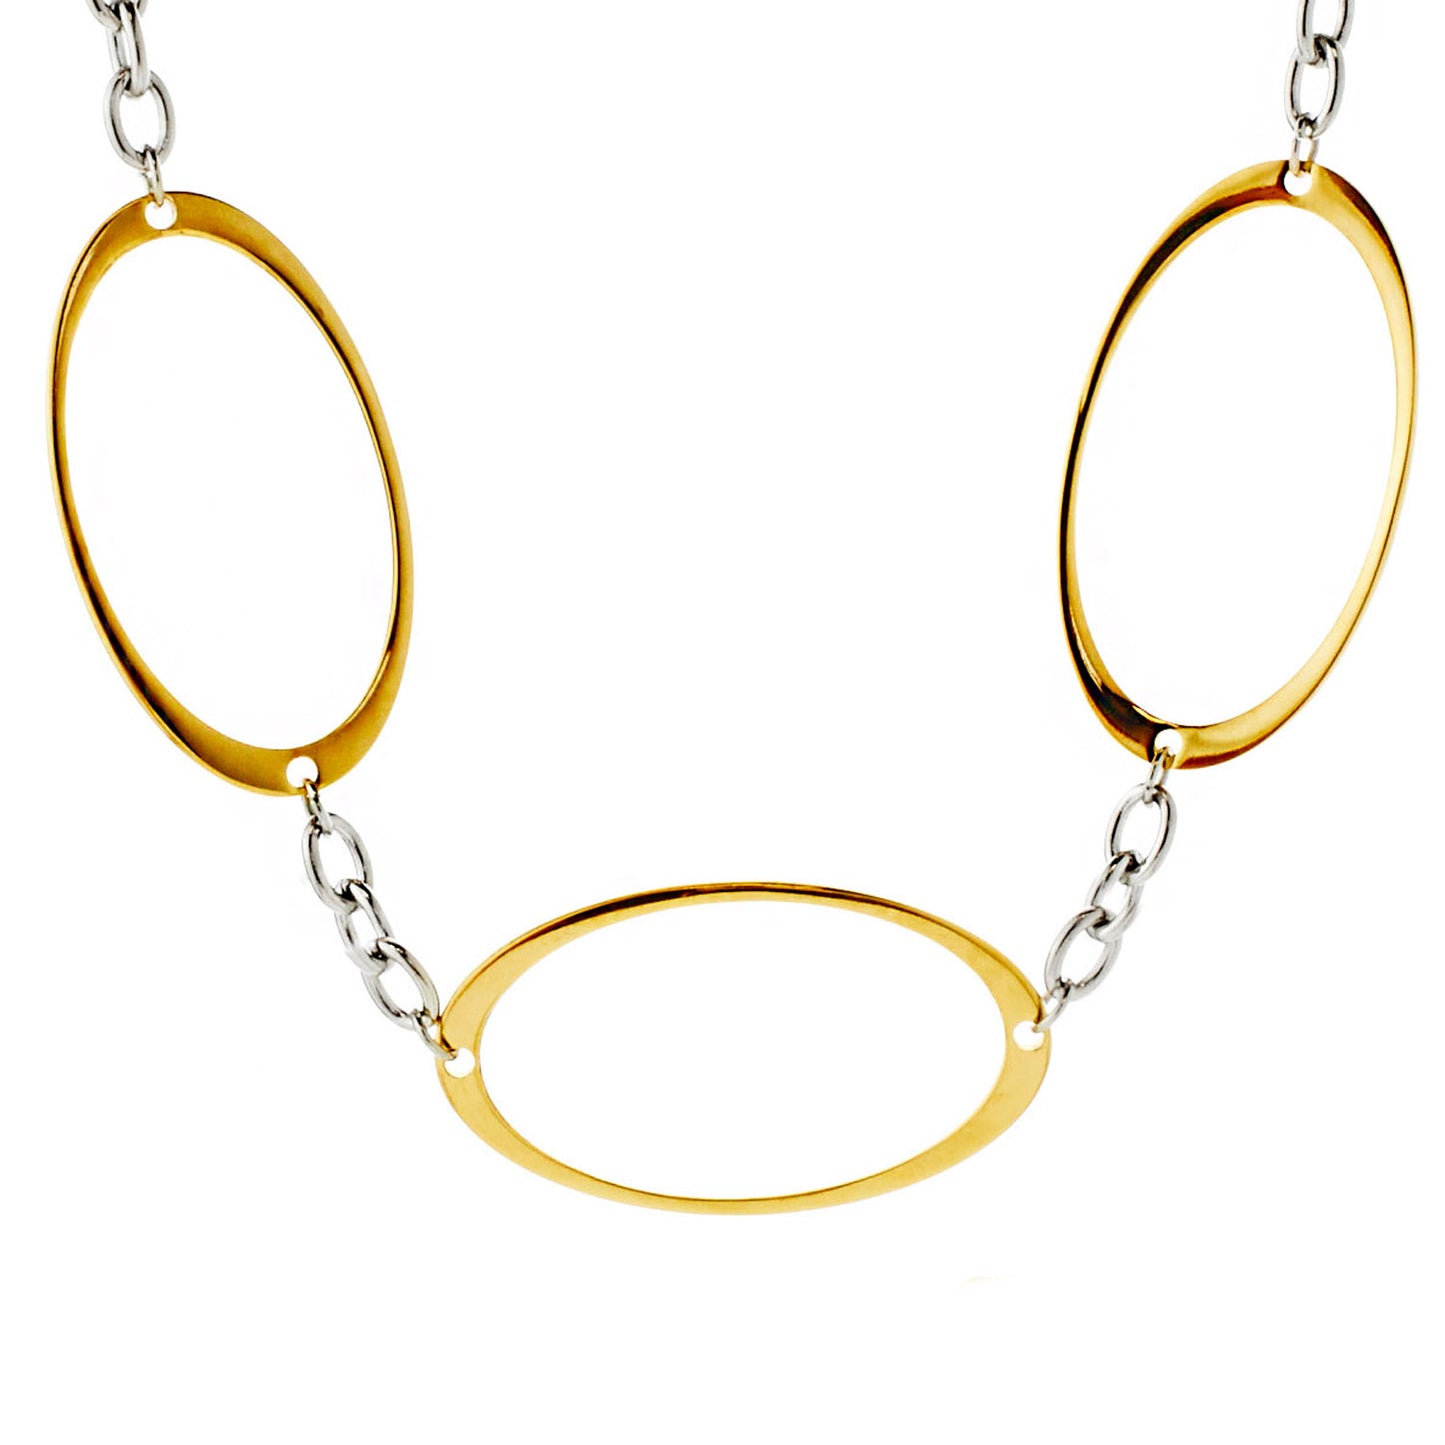 ELYA Polished Oval Cutout Two-Tone Stainless Steel Link Necklace (25 mm) - 17"